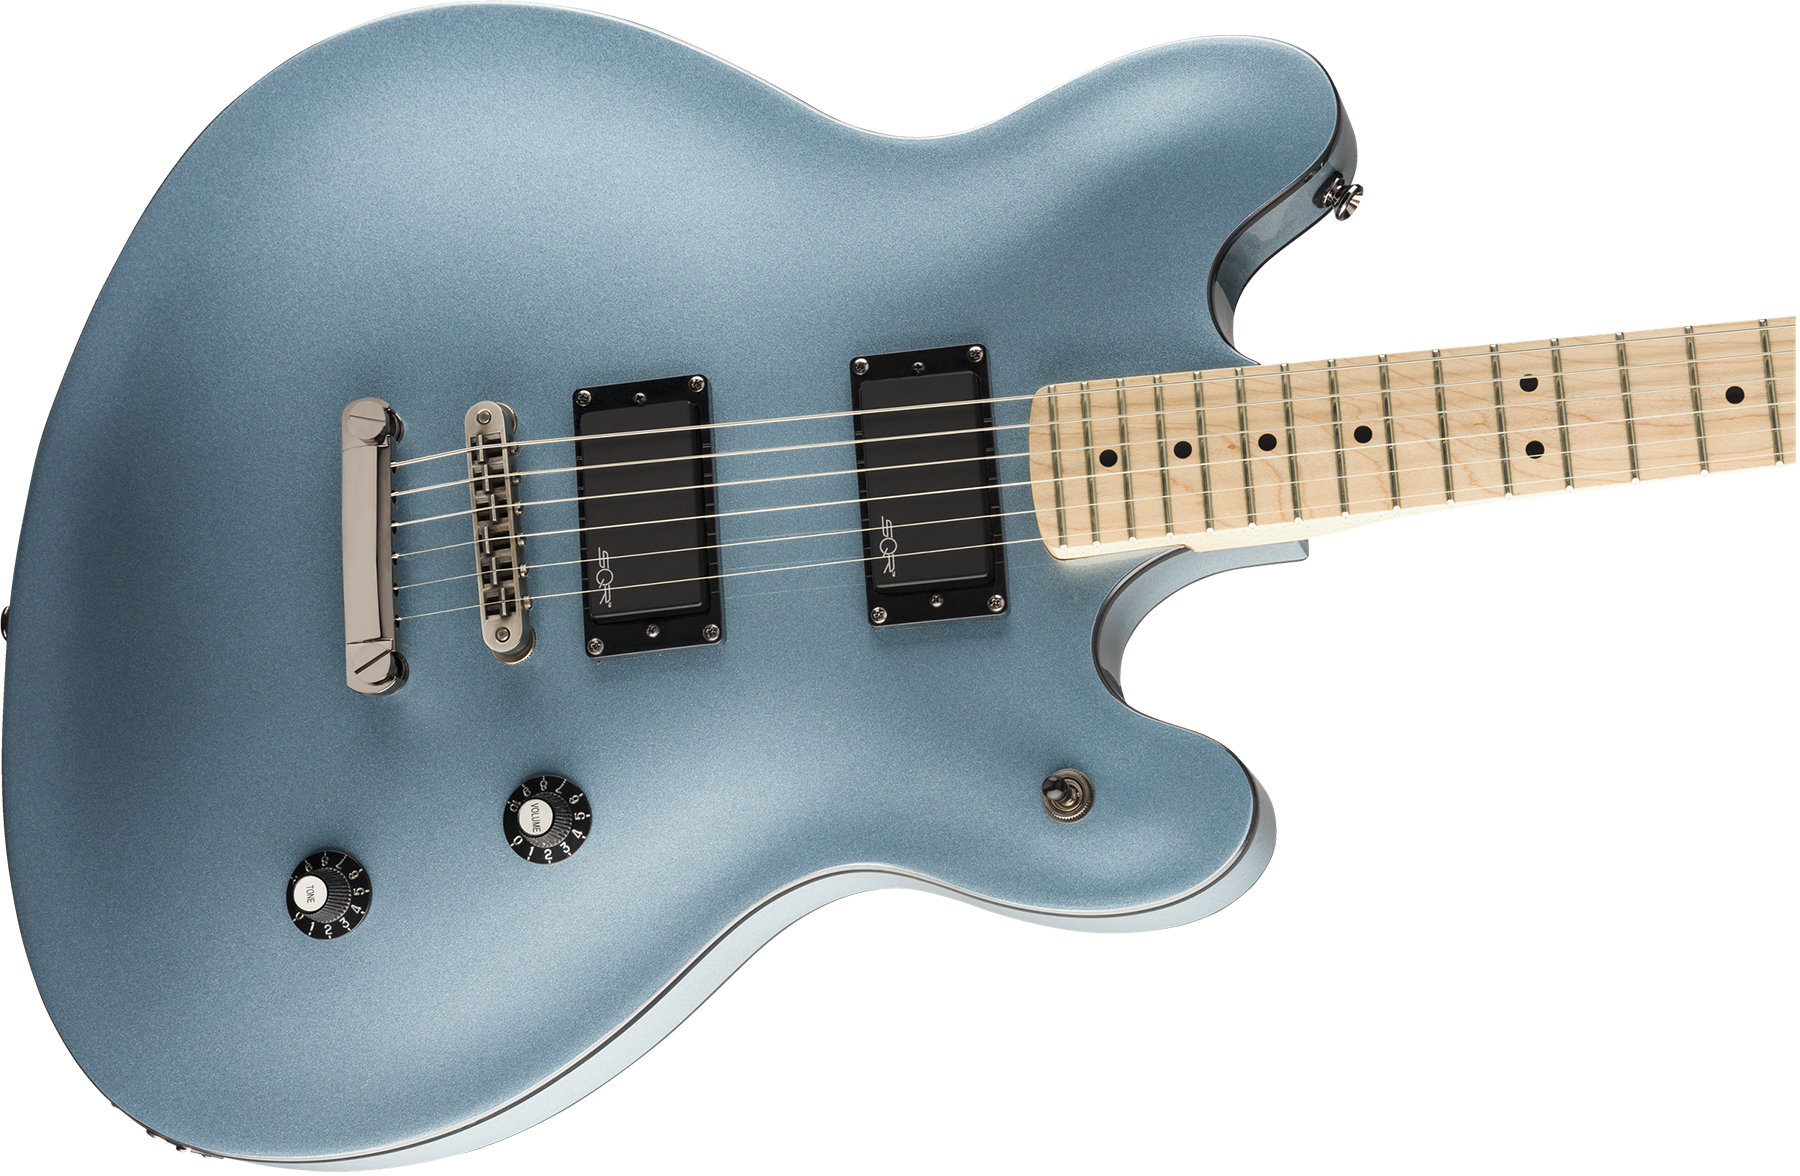 Squier Starcaster Contemporary Active Starcaster 2019 Hh Ht Mn - Ice Blue Metallic - Retro rock electric guitar - Variation 2